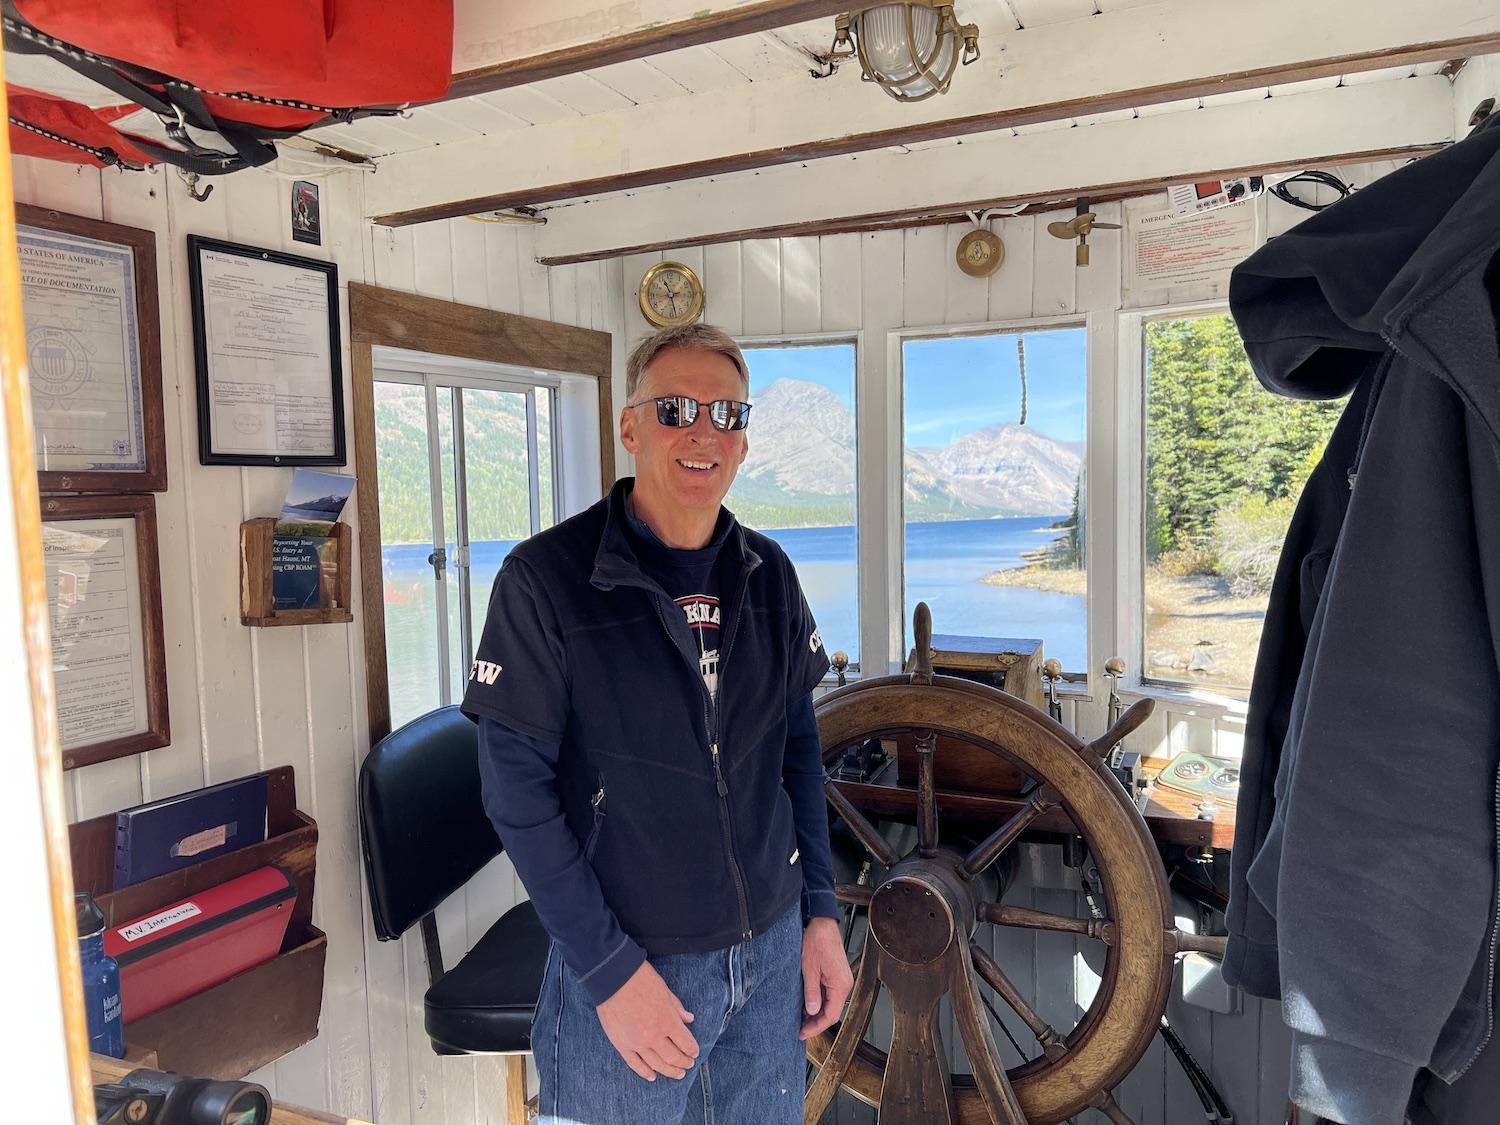 Phil Ruppel is the longtime captain of the M.V. International for the Waterton Shoreline Cruise Co.